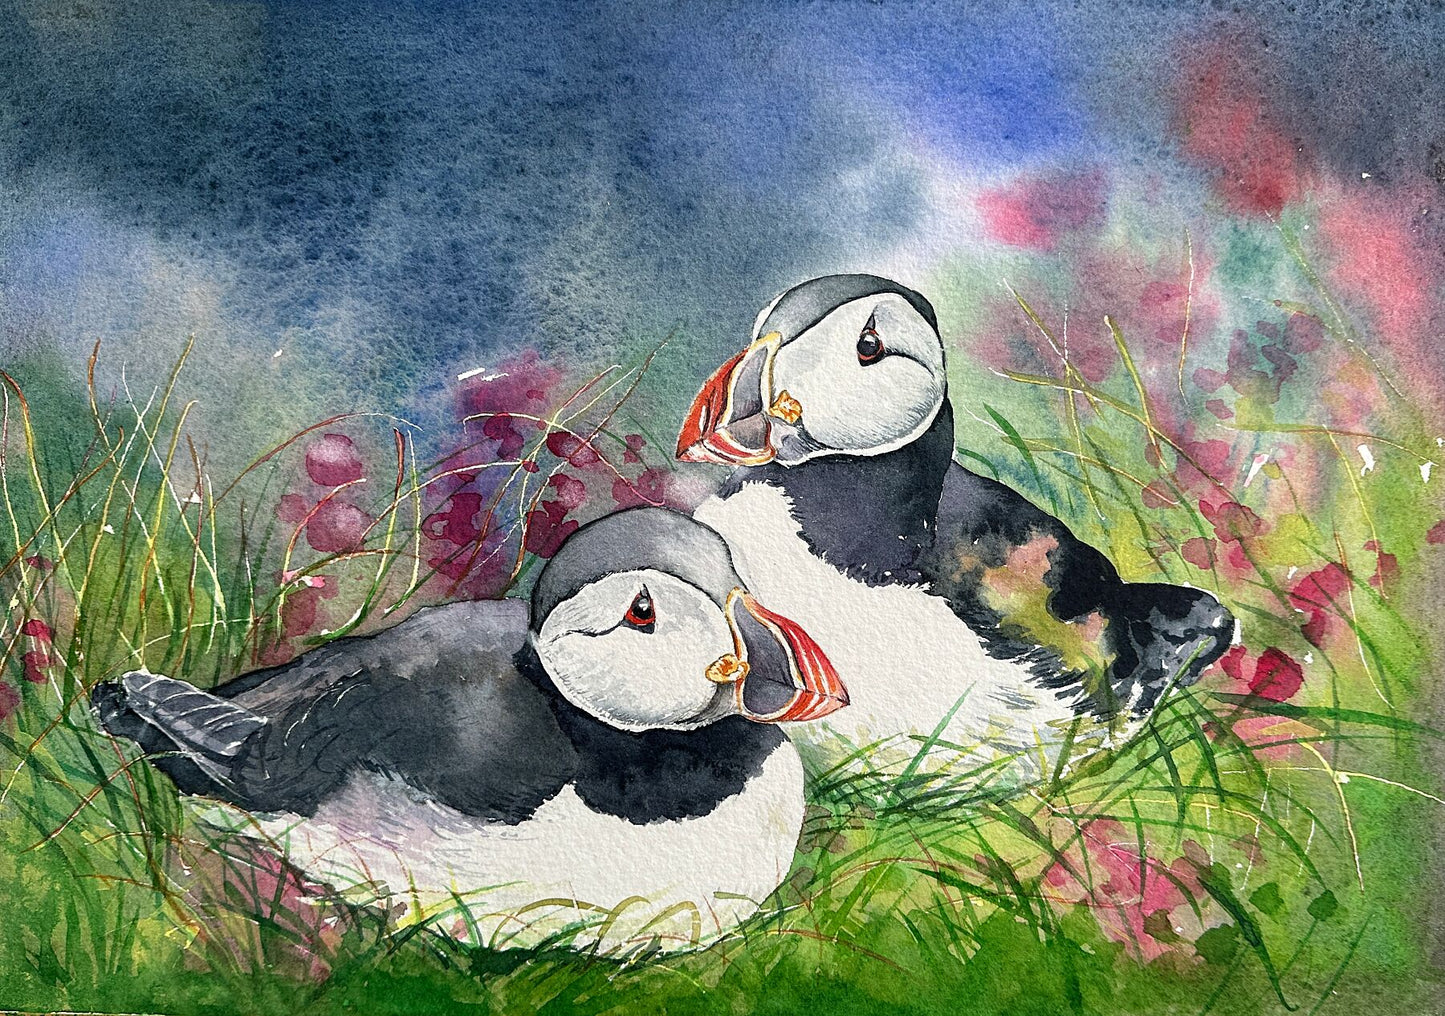 limited edition print from a watercolour painting of two puffins sitting in the long grass with pink wildflowers and blue sea in the background